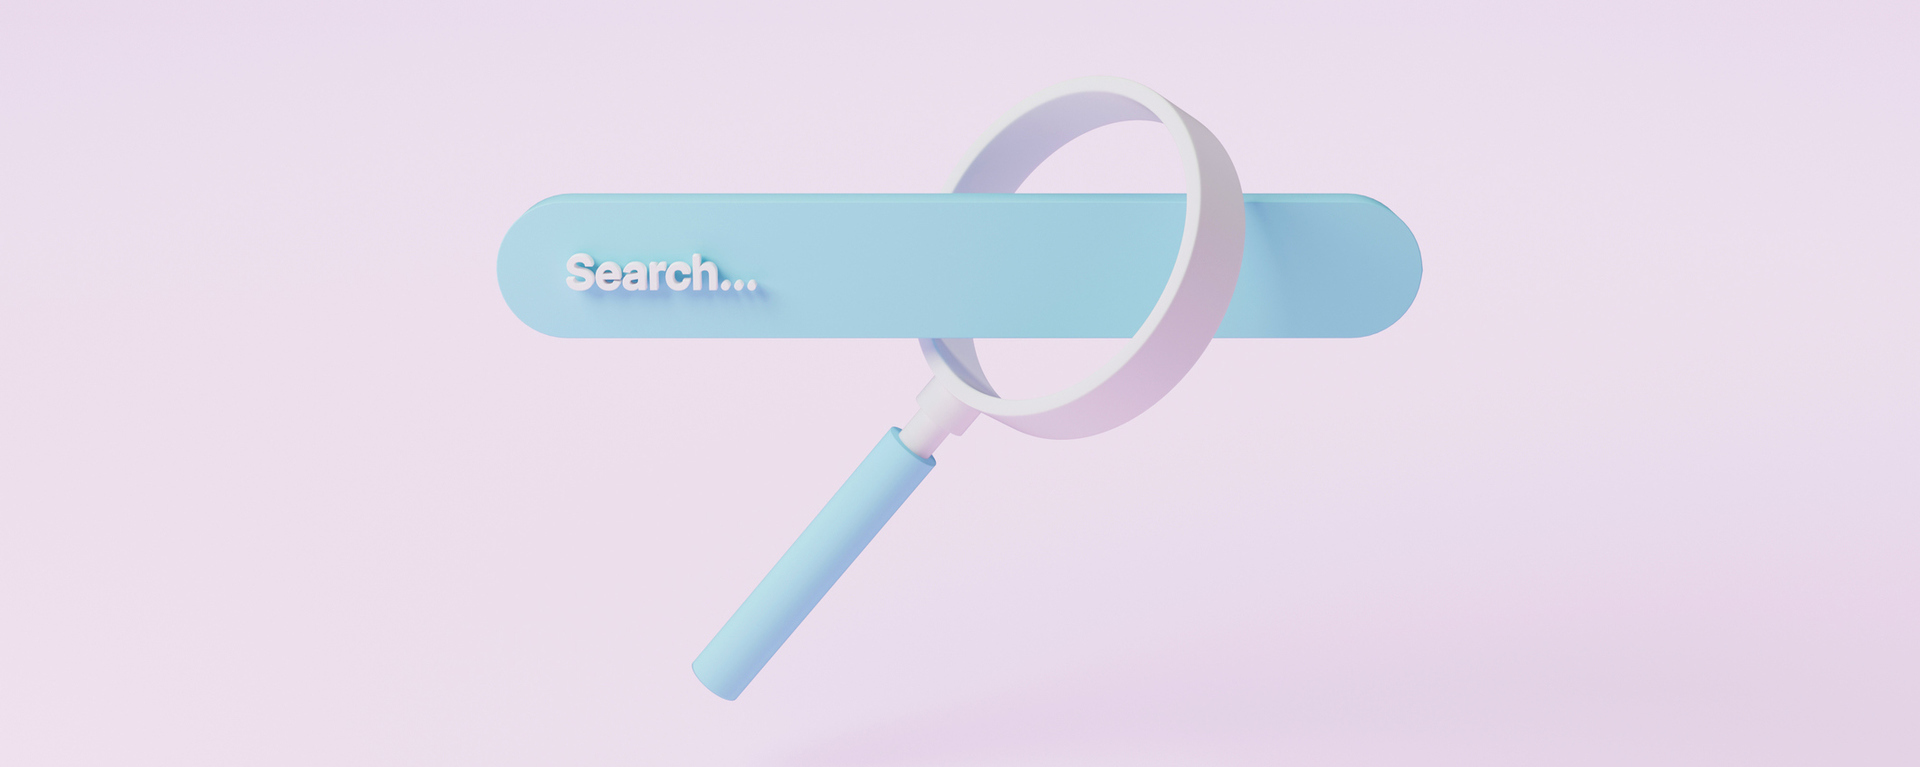 A search bar inside a magnifying glass